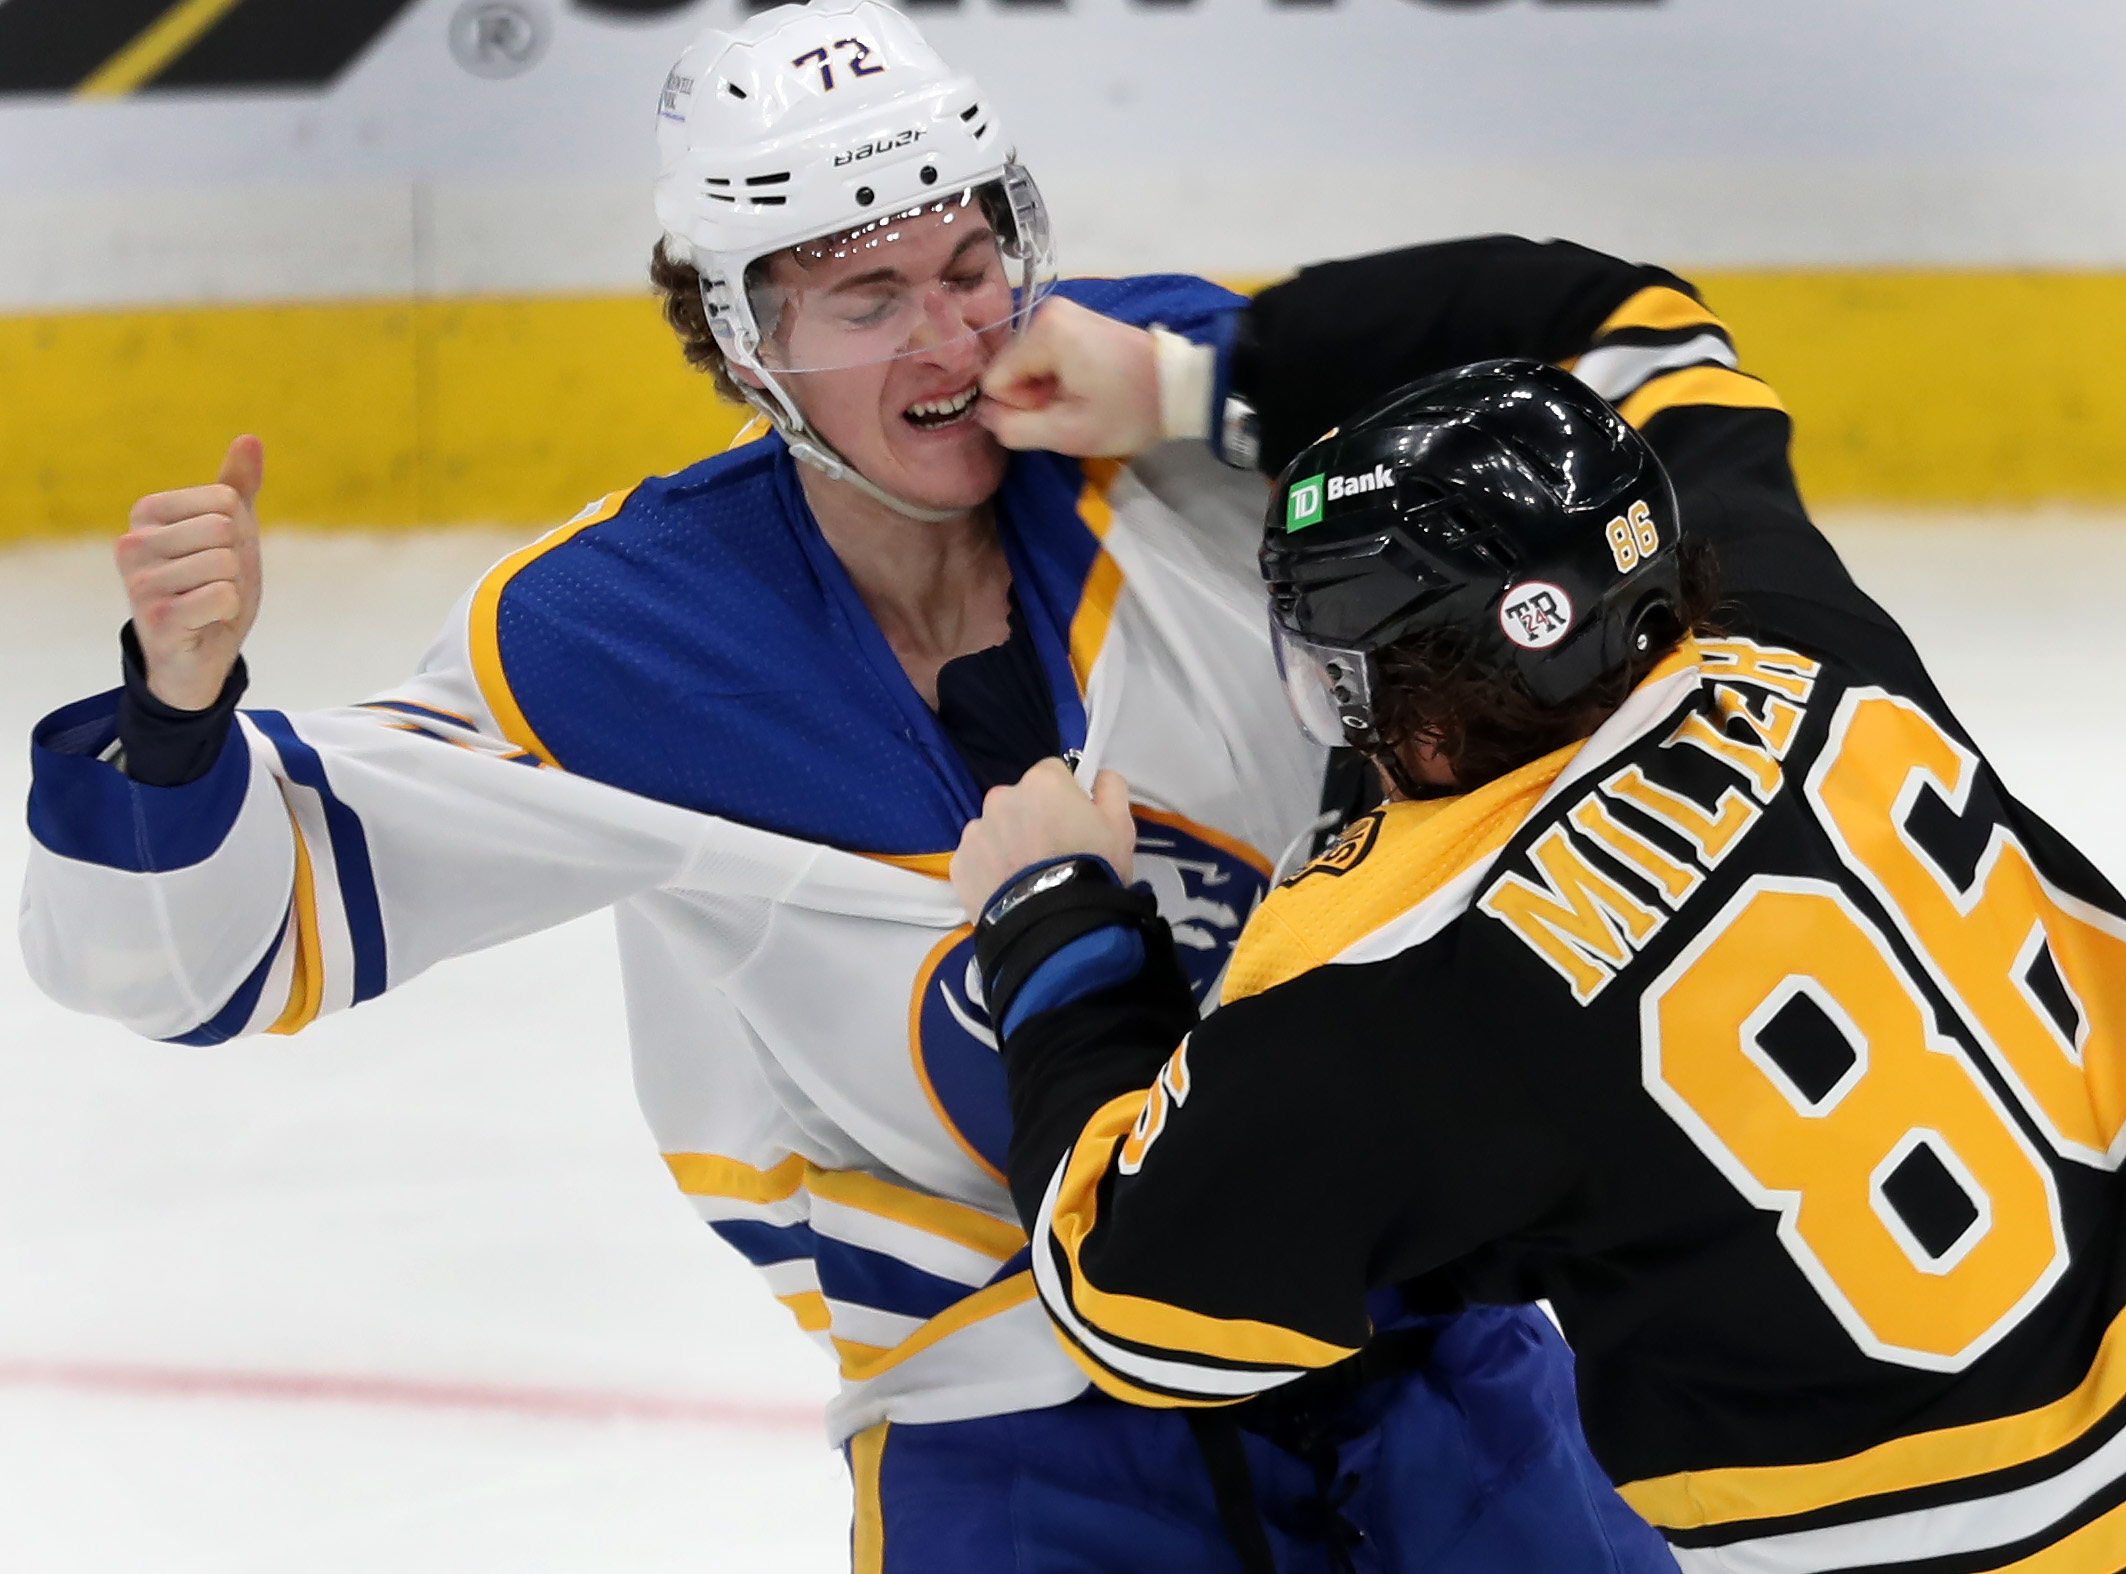 Kevan Miller (right) connected with a right to the face of Buffalo's Tage Thompson during a game last April.